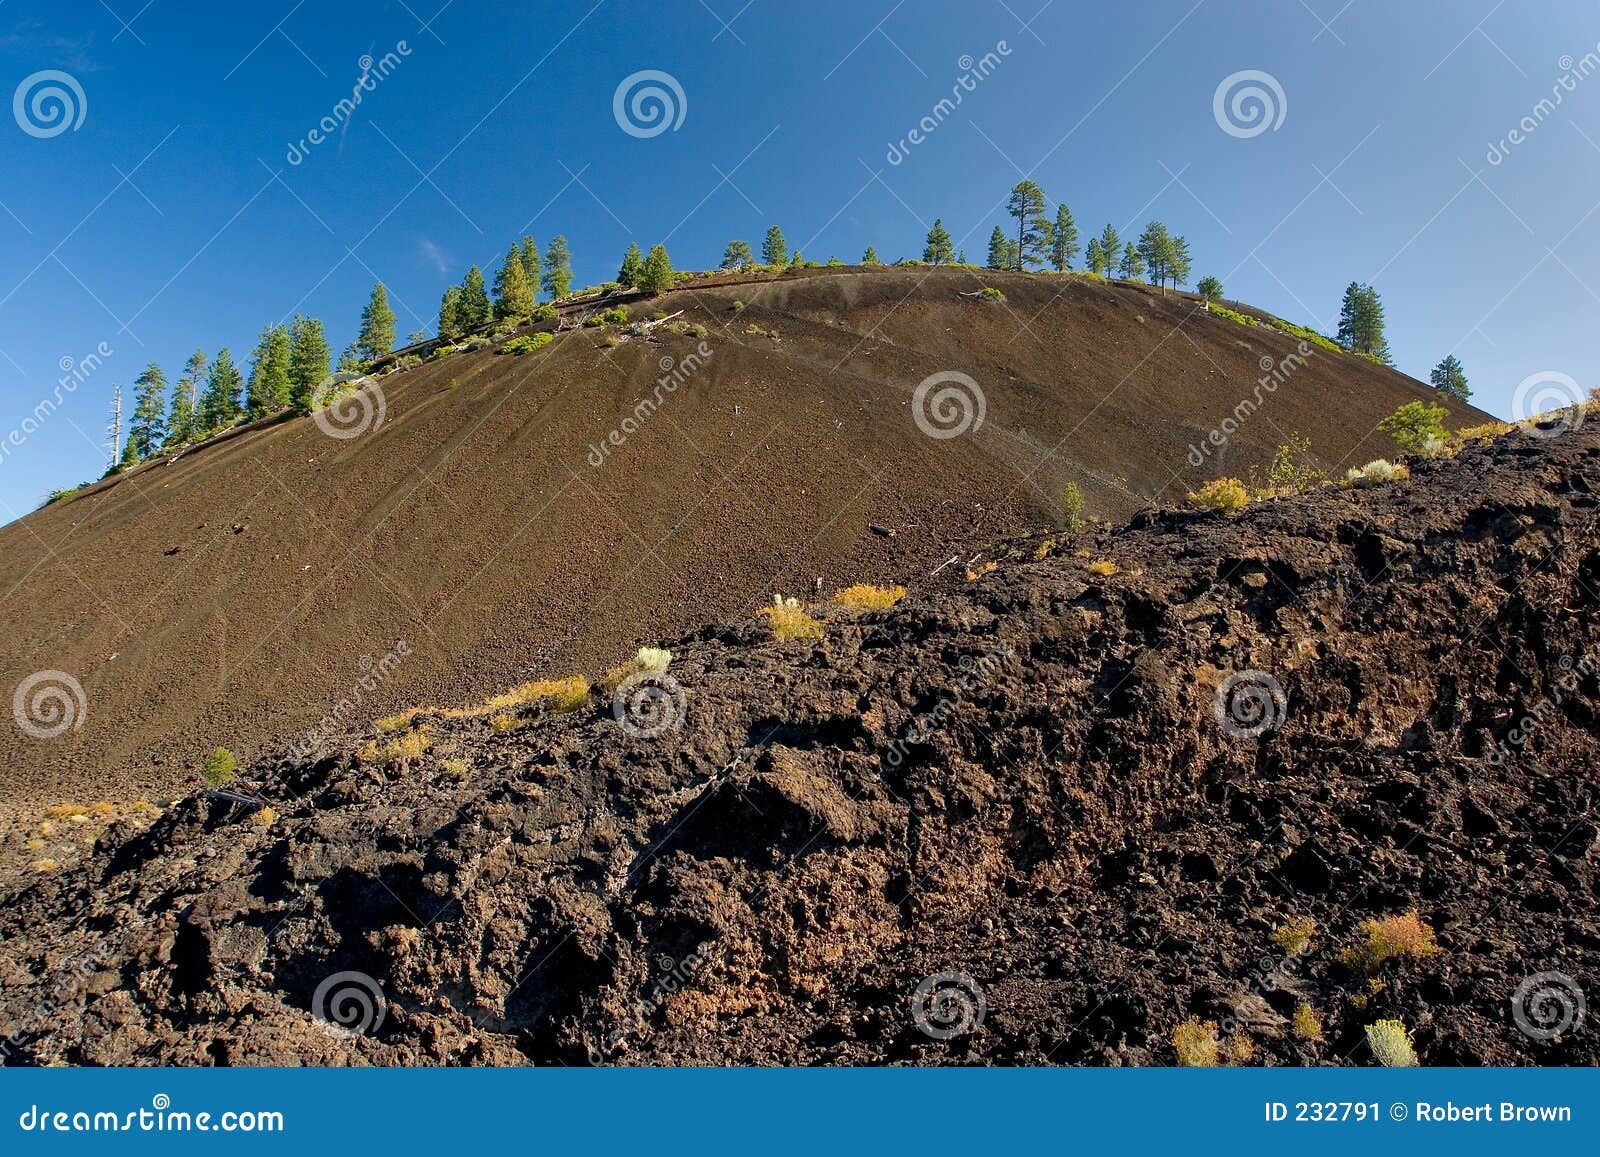 to the cinder cone